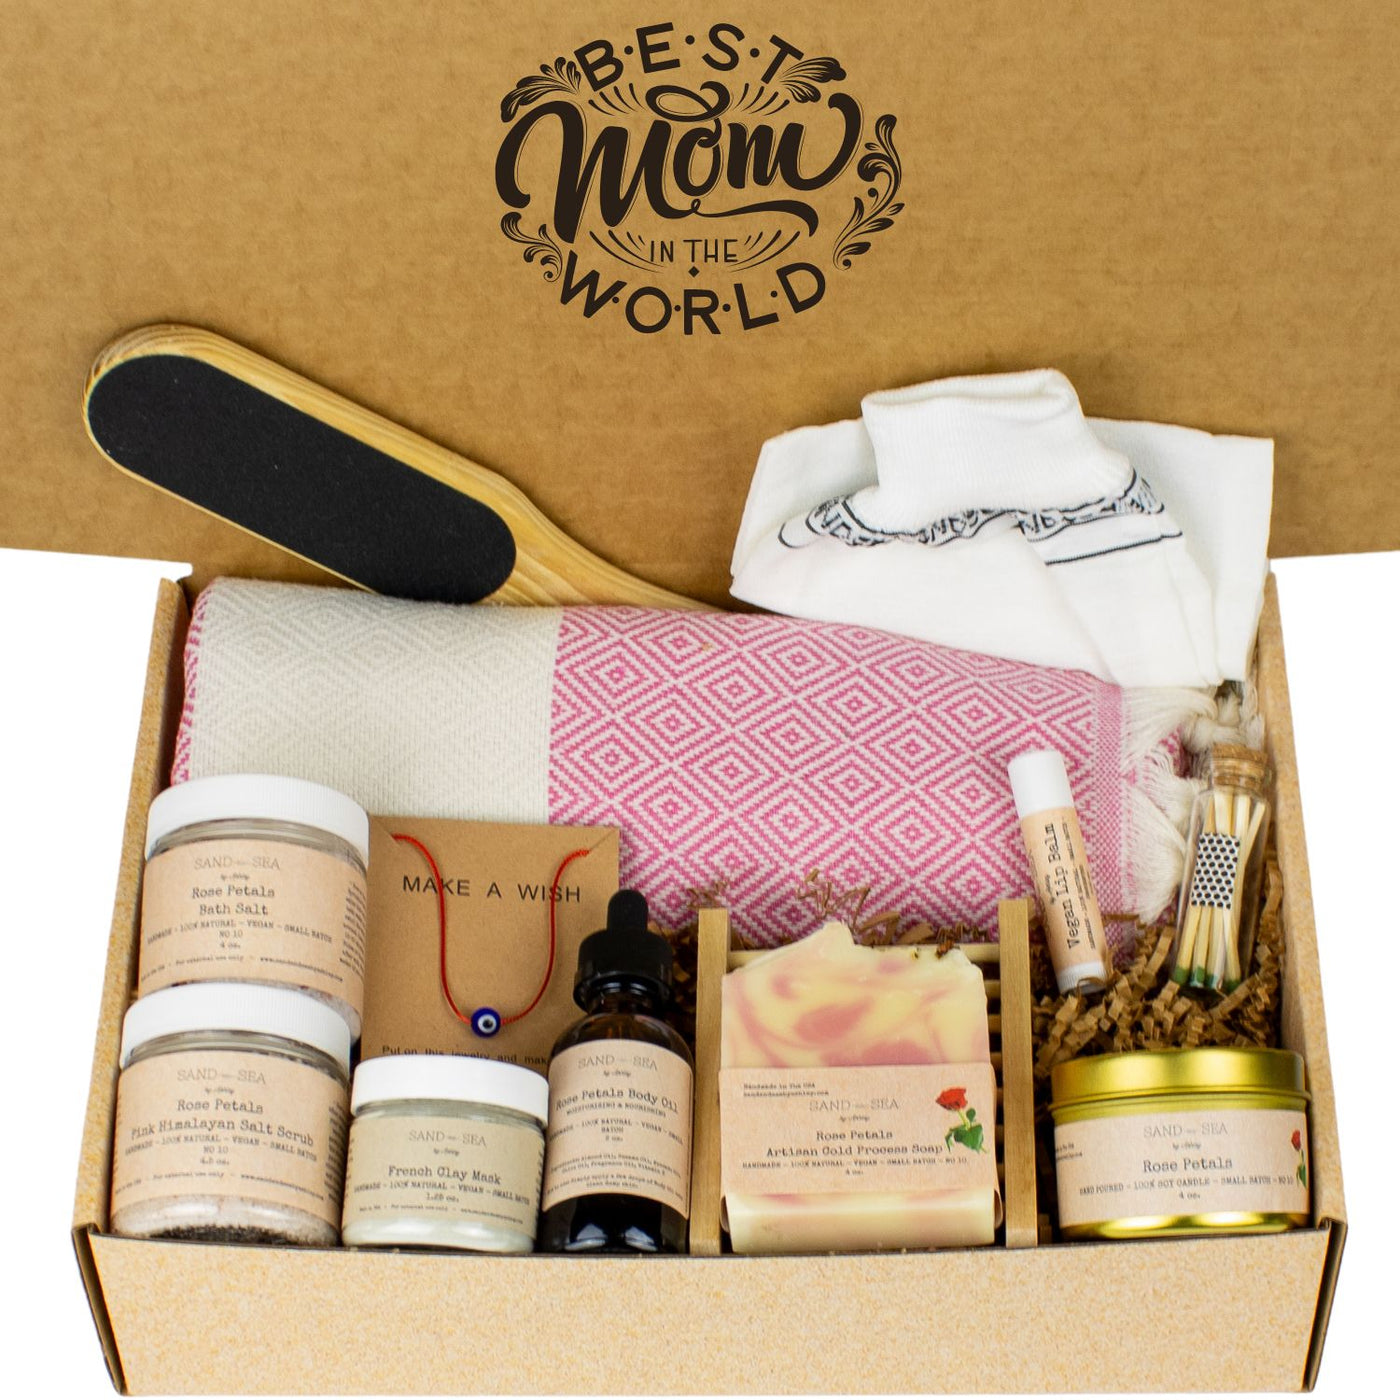 Best Mom in The World Spa Gift Basket for Her - Handmade Rose Petals Spa Gift Set with Turkish Towel 13 pieces